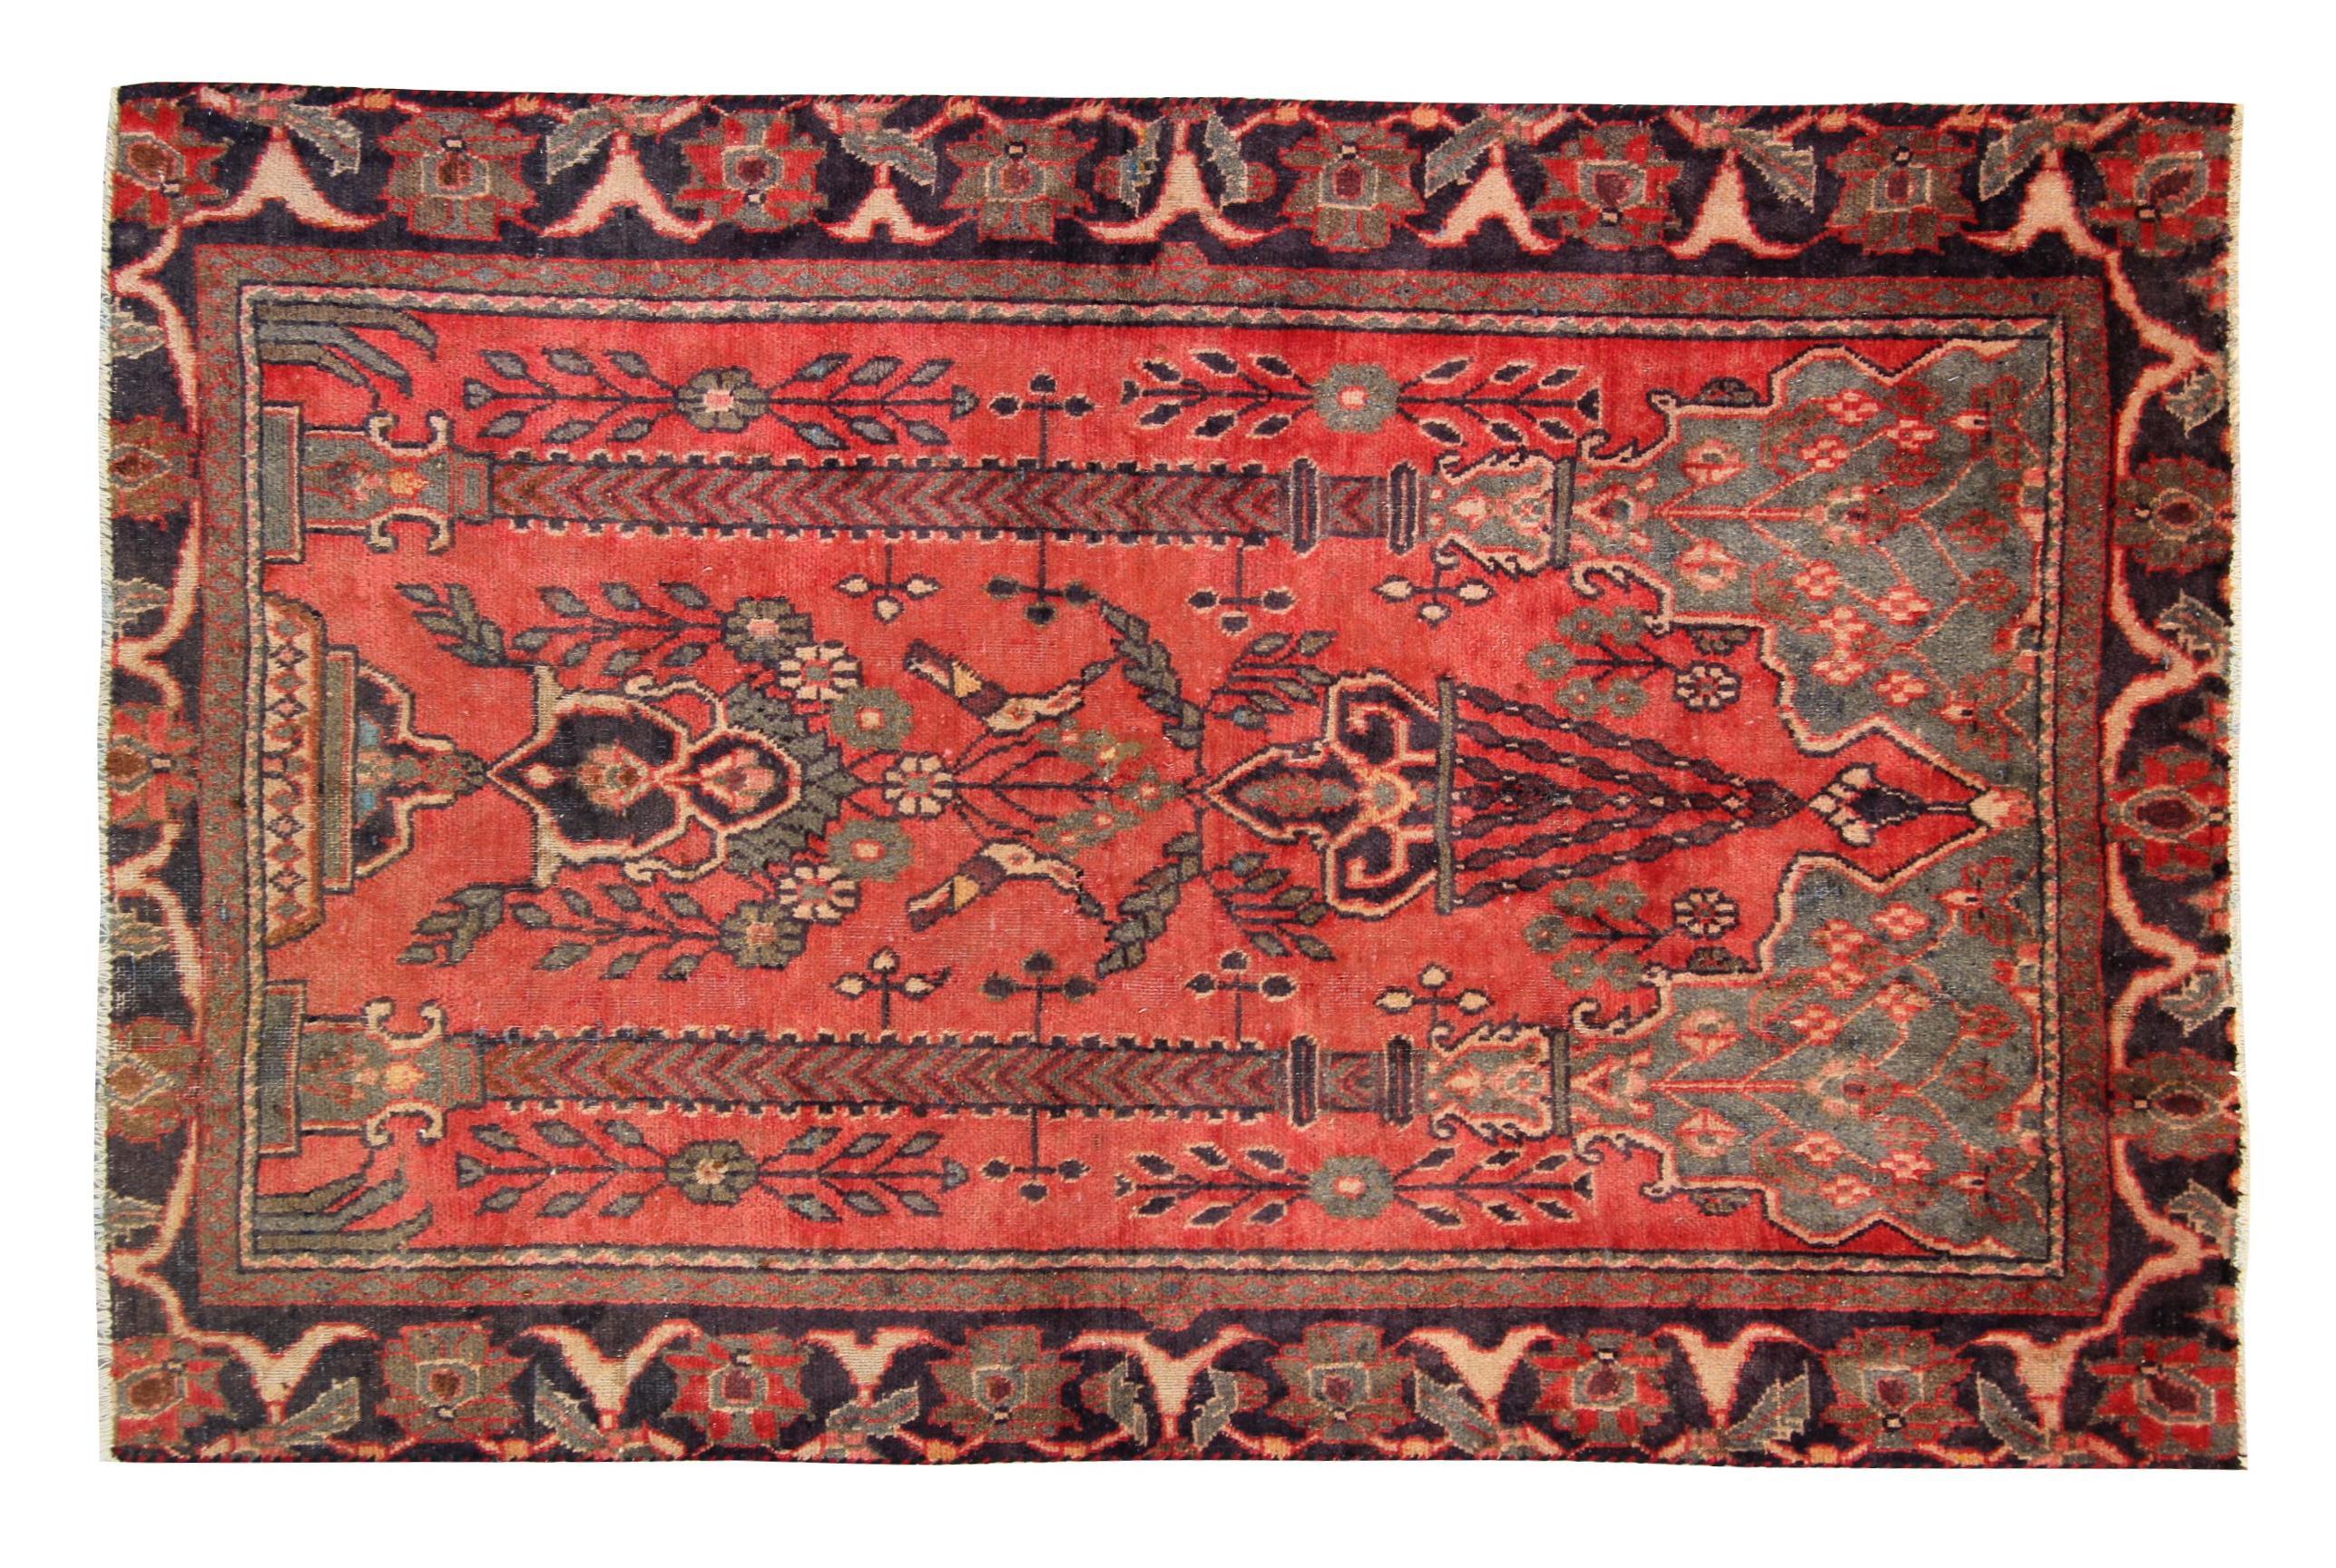 Elegantly woven with a top to bottom design, a rich pink/red background decorated with a symmetrical floral design in accents of brown, green and beige. The double pillar design and delicate floral patterns make this rug the perfect accent piece for